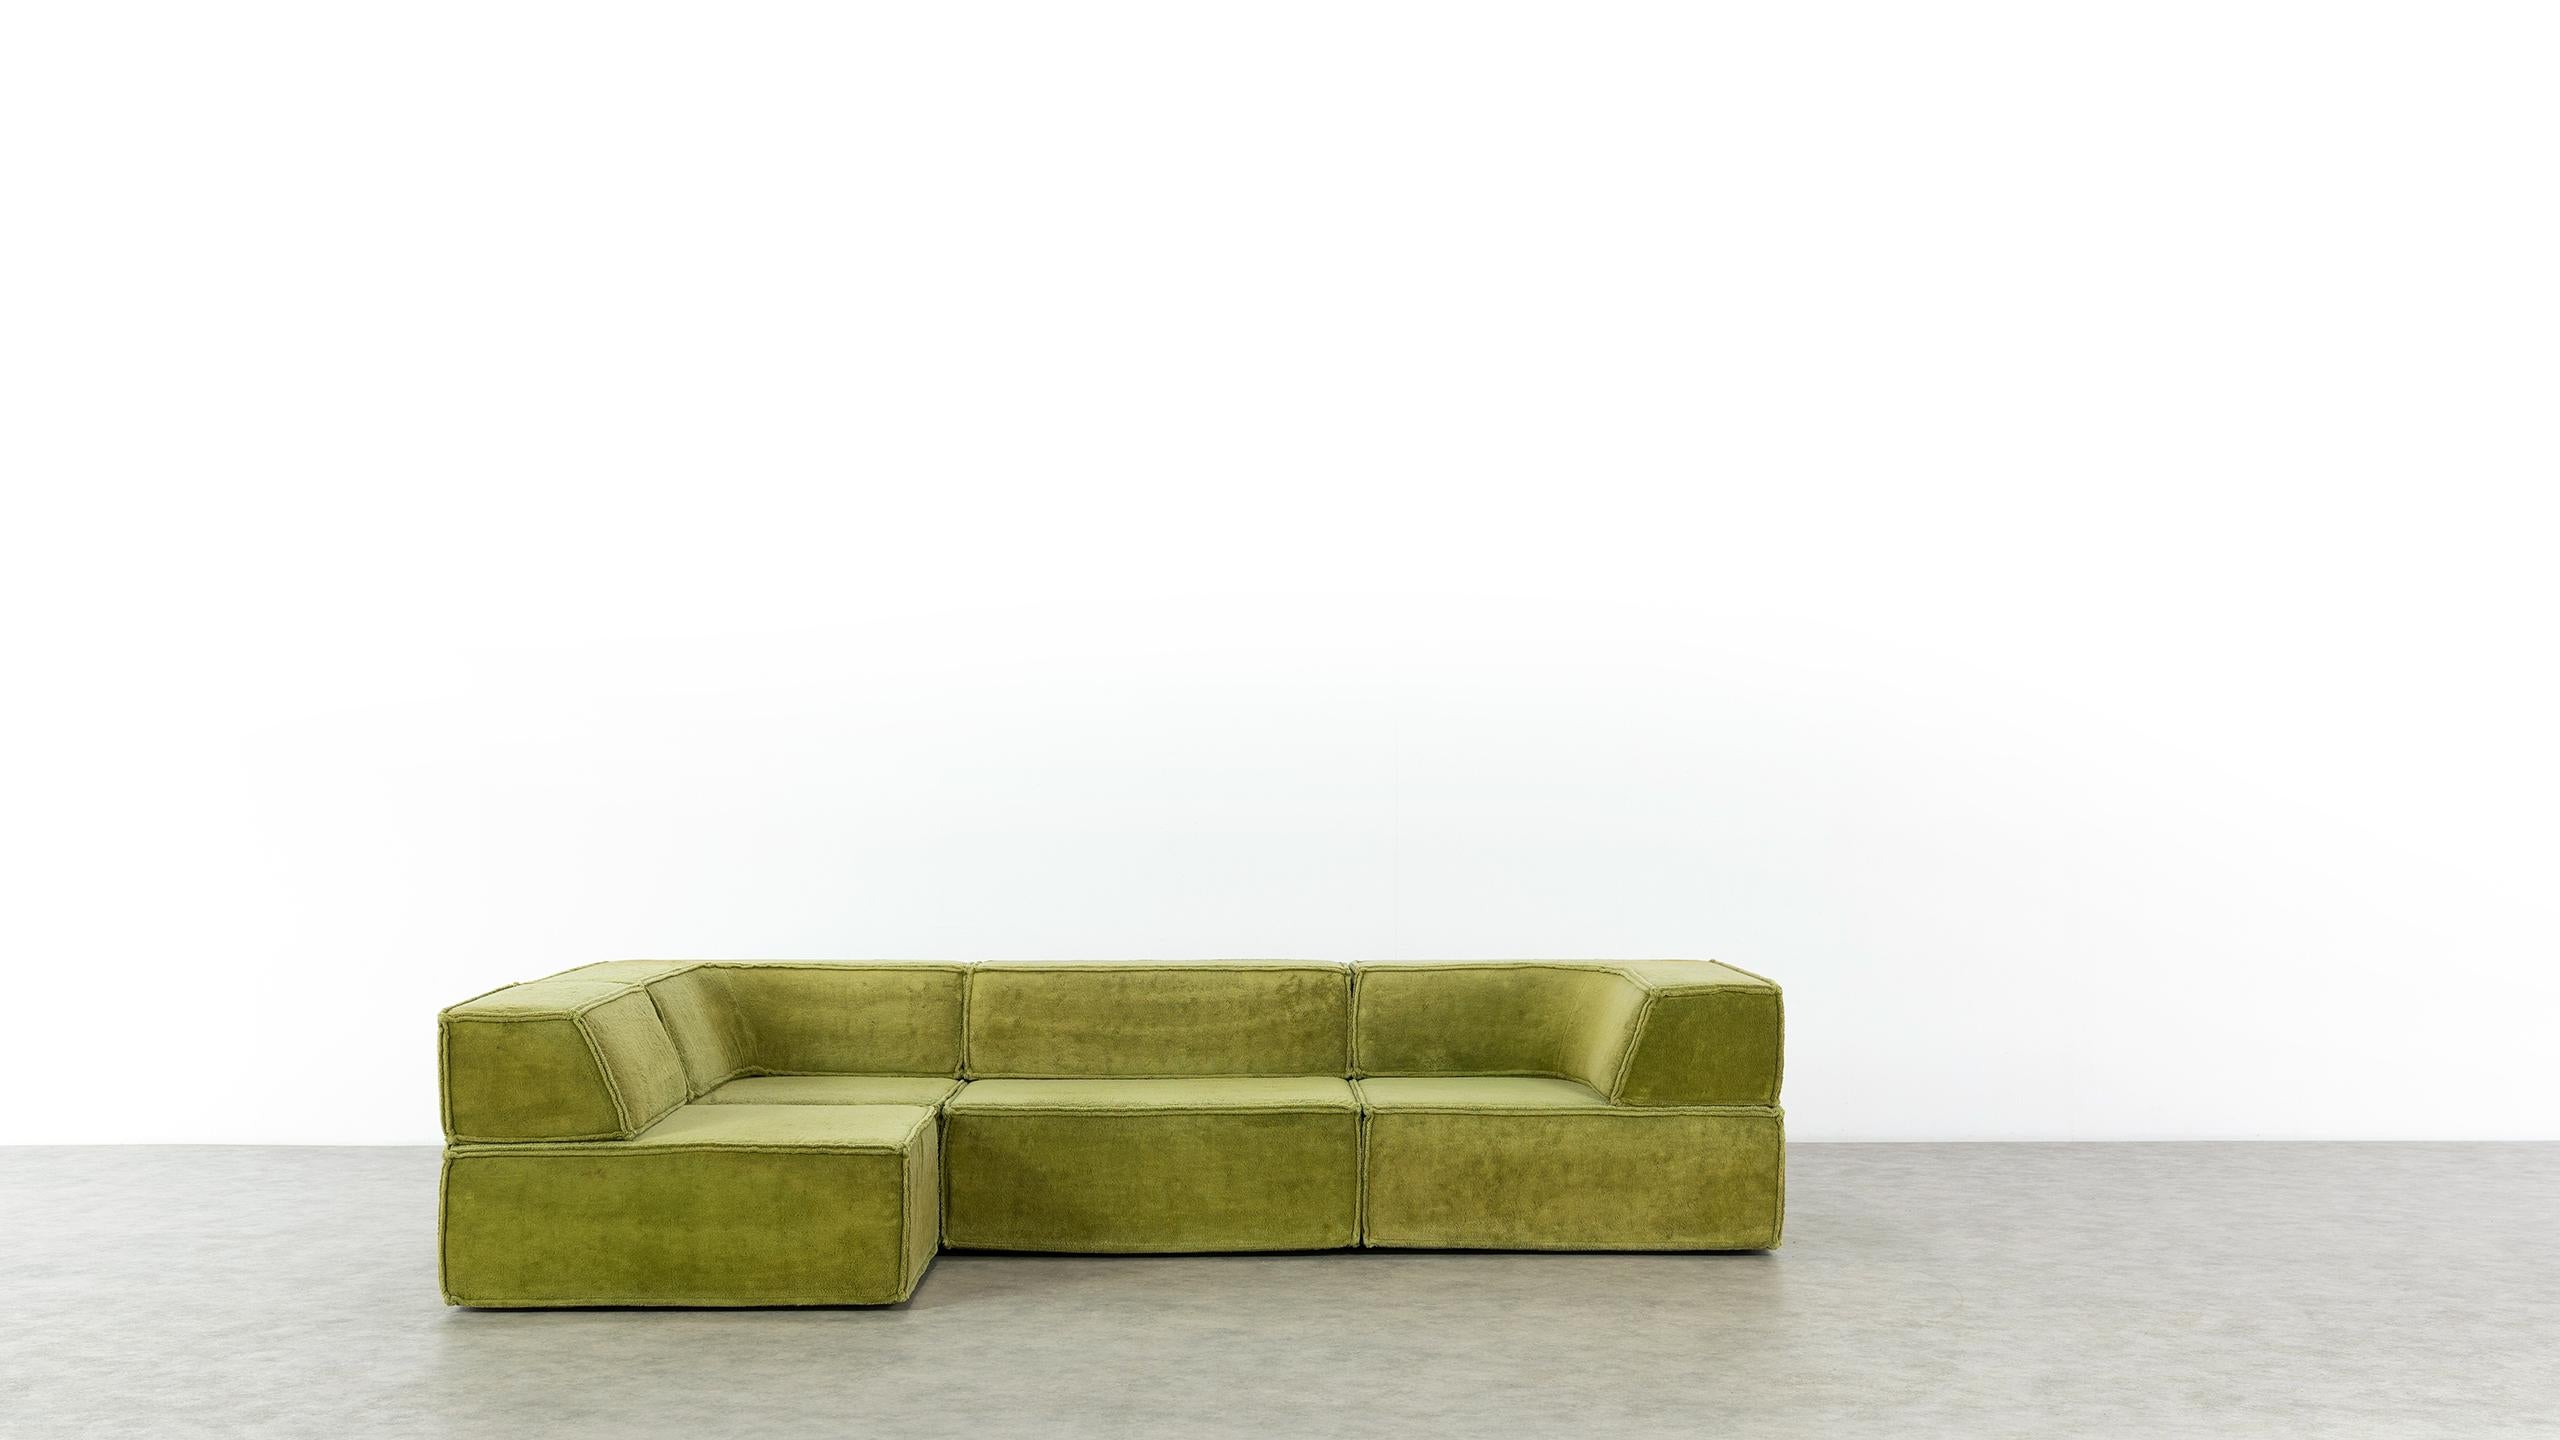 Fabric COR Trio Modular Sofa, Giant Landscape in Green, 1972 by Team Form Ag, Swiss